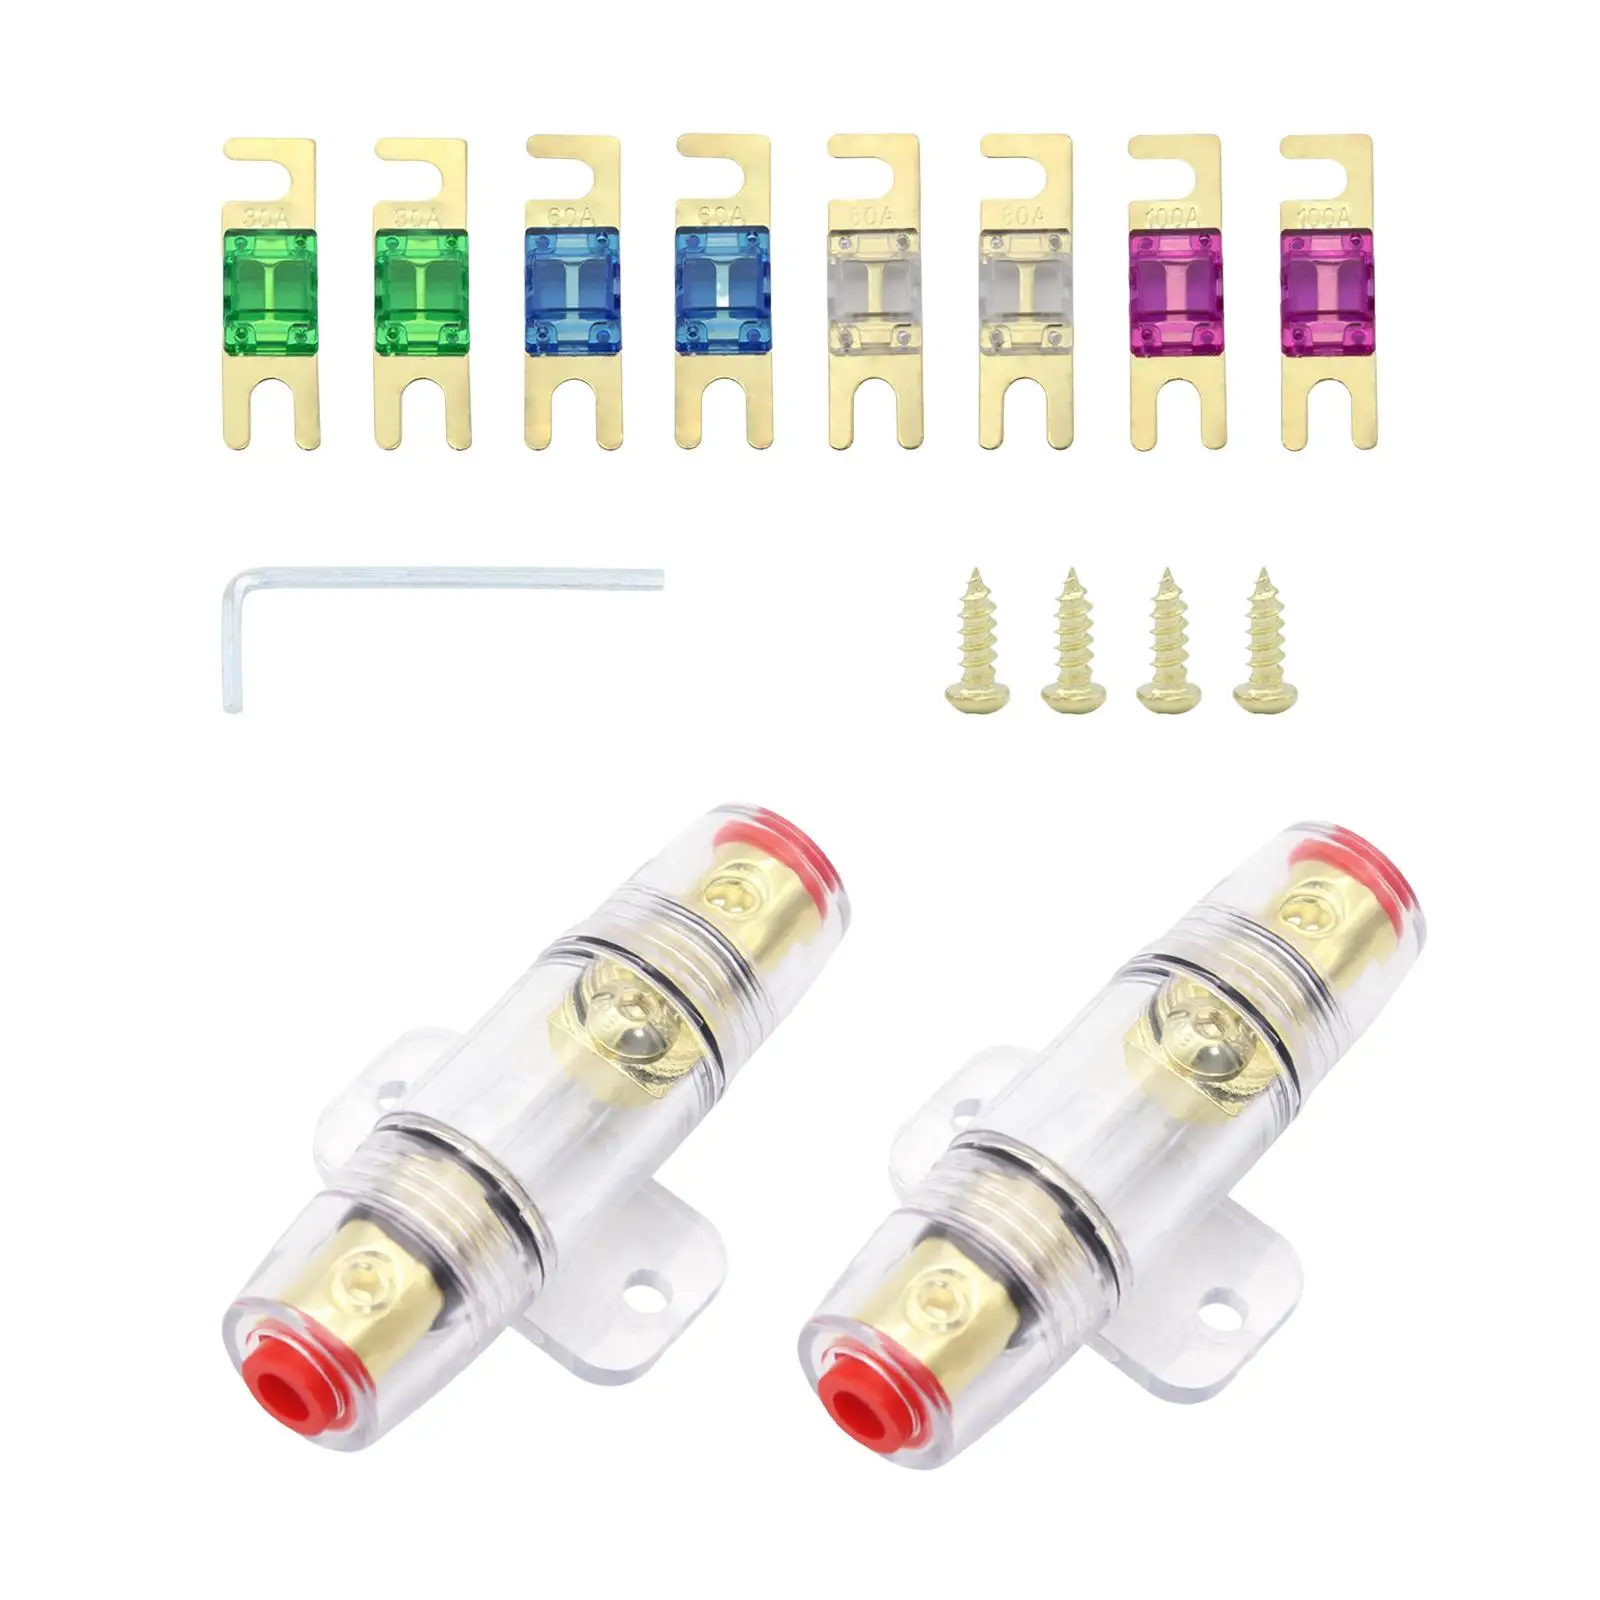 2 Pieces Mini Anl Fuse Holder Set Clear Cover with 30A 60A 80A 100A Fuses